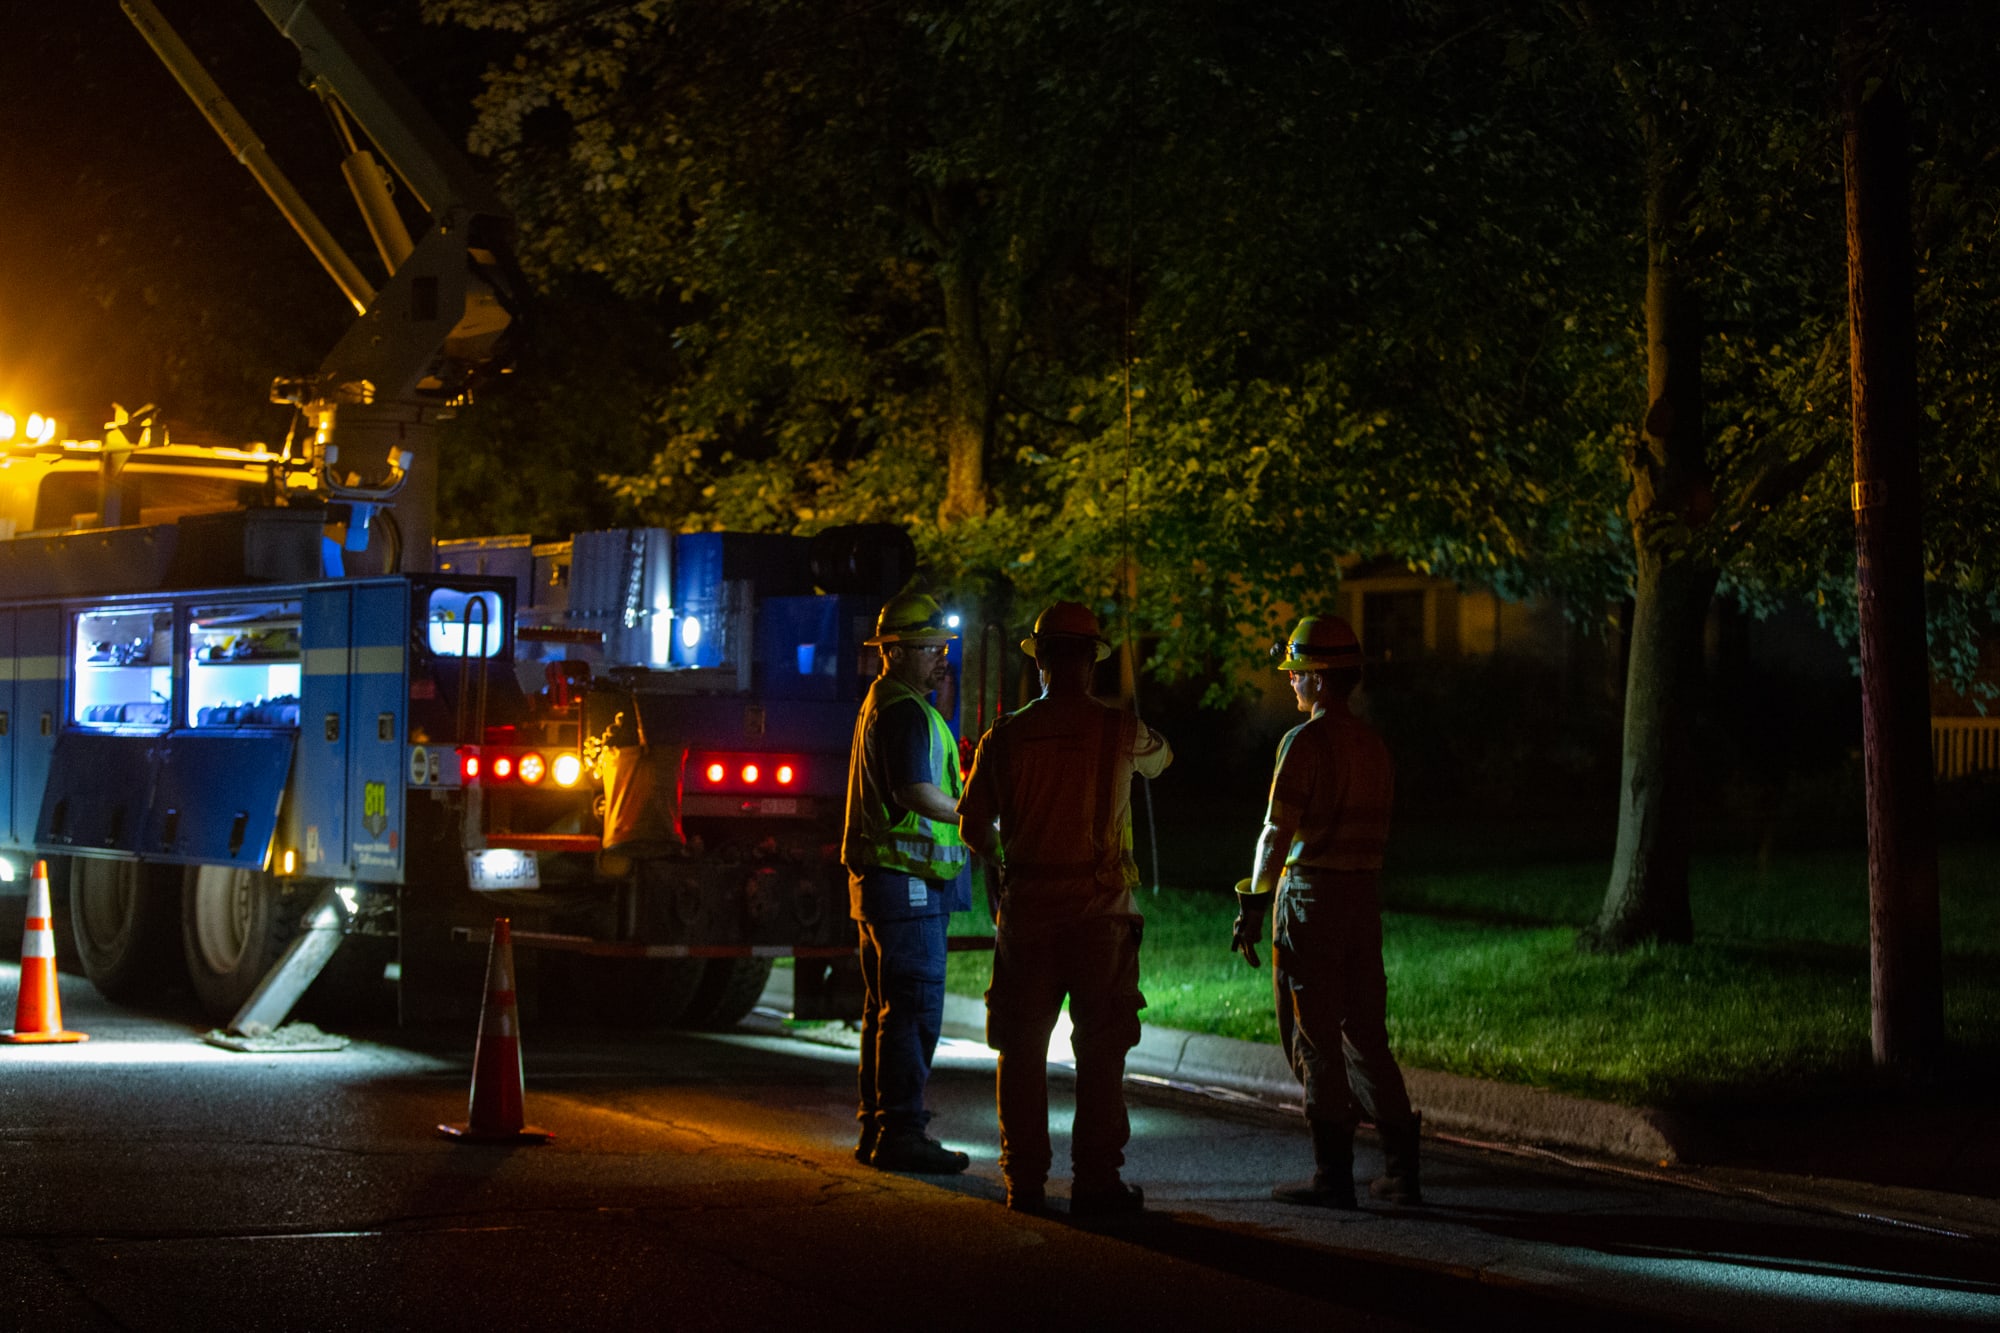 Linesmen from Consumers Energy work on a power outage caused by a lightning strike in Kalamazoo, Michigan. The Michigan Public Service Commission this summer recommended, among other things, that all public utilities review customer communication plans. (Alex Simon/News21)